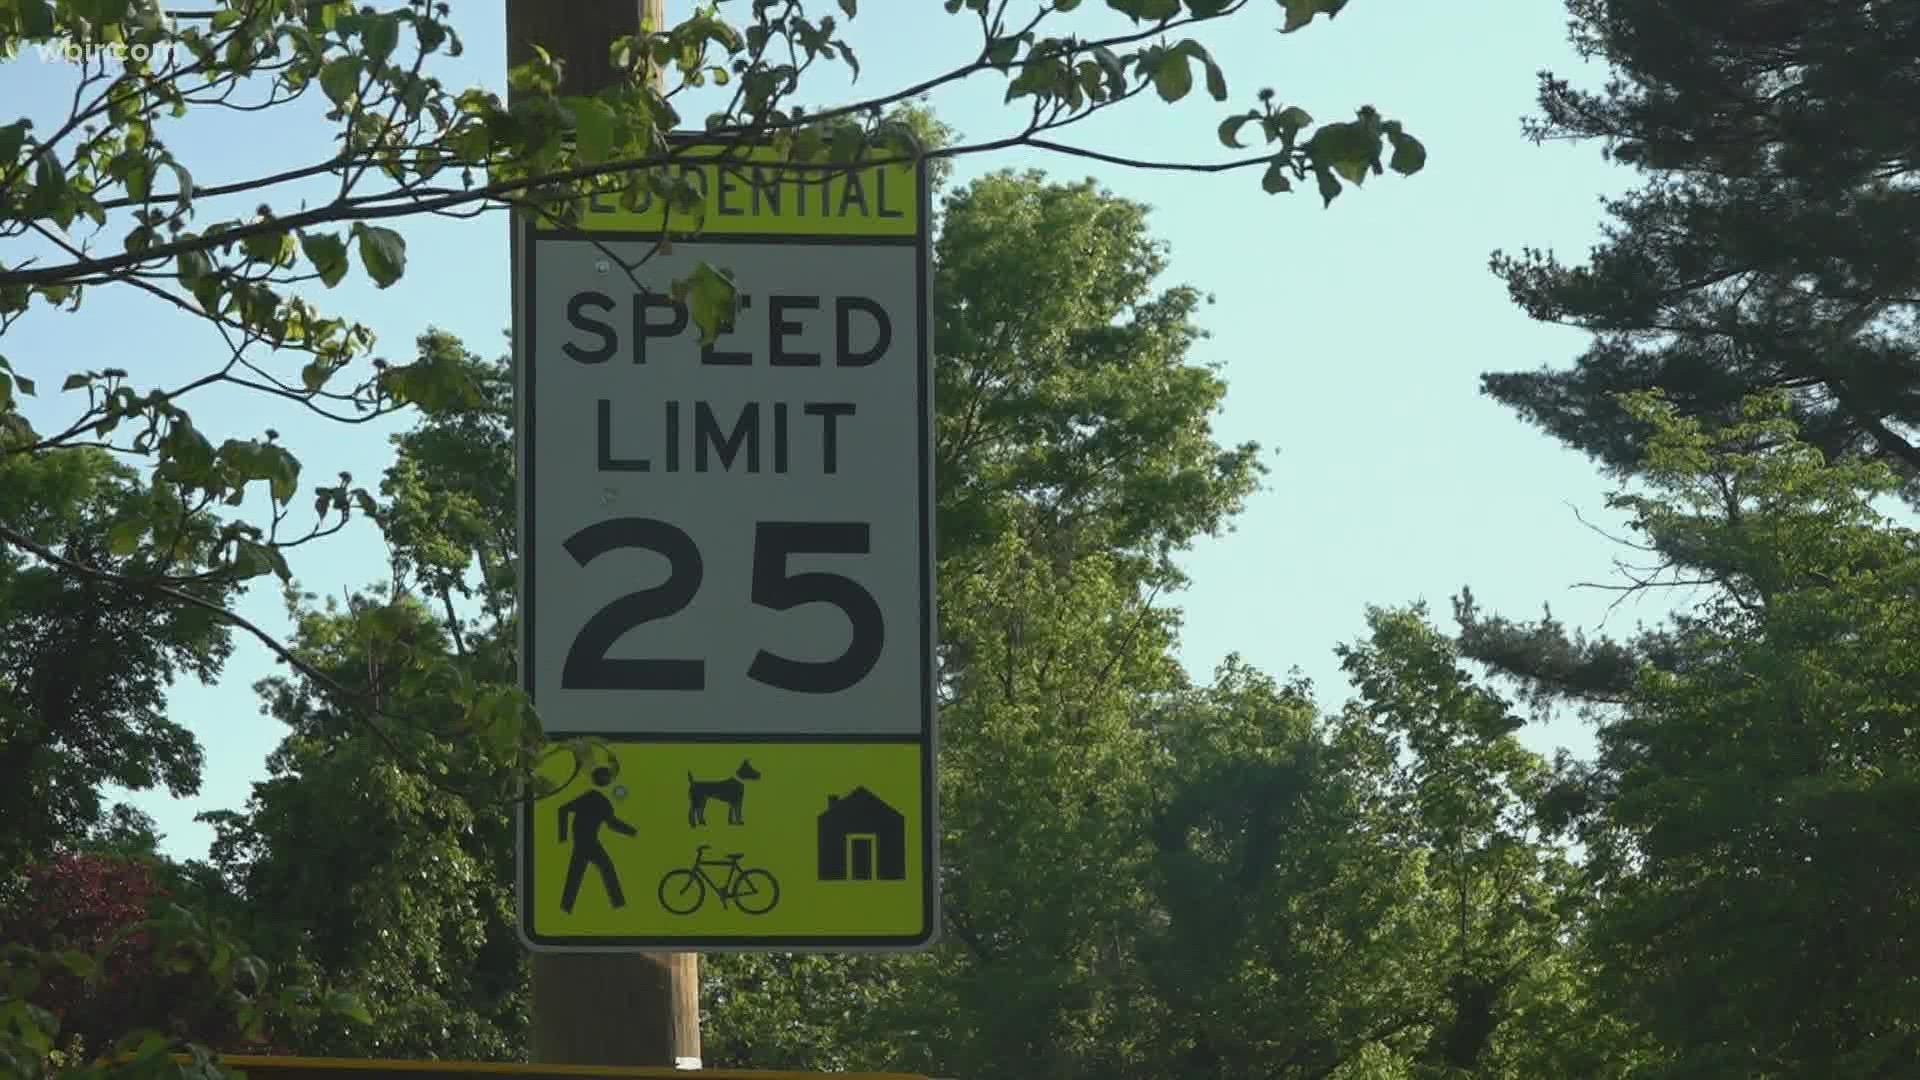 A neighborhood just off Chapman Highway has been dealing with speeders and multiple crashes since 2017. Now they're taking action.